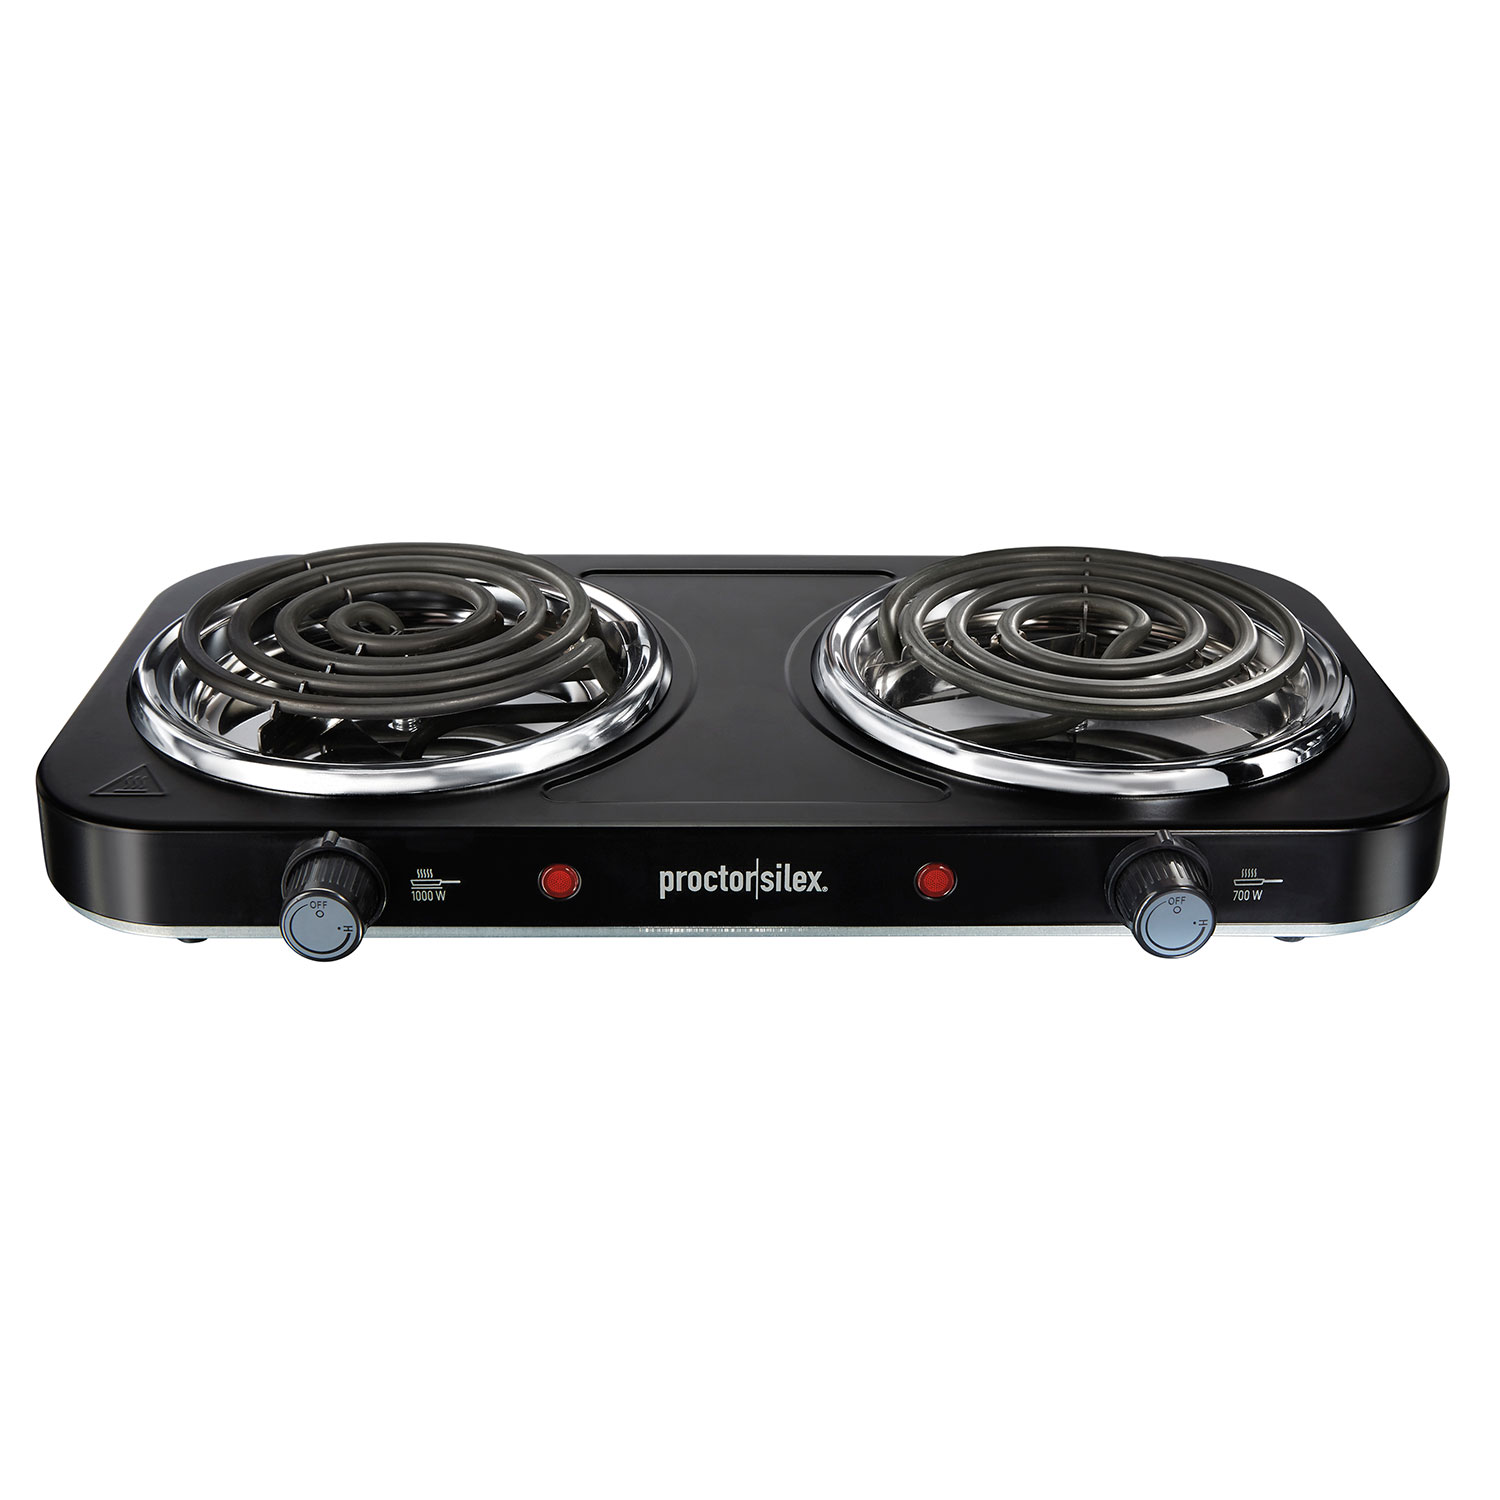 Double Electric Burner Cooktop with Adjustable Temperature - 34115 Small Size